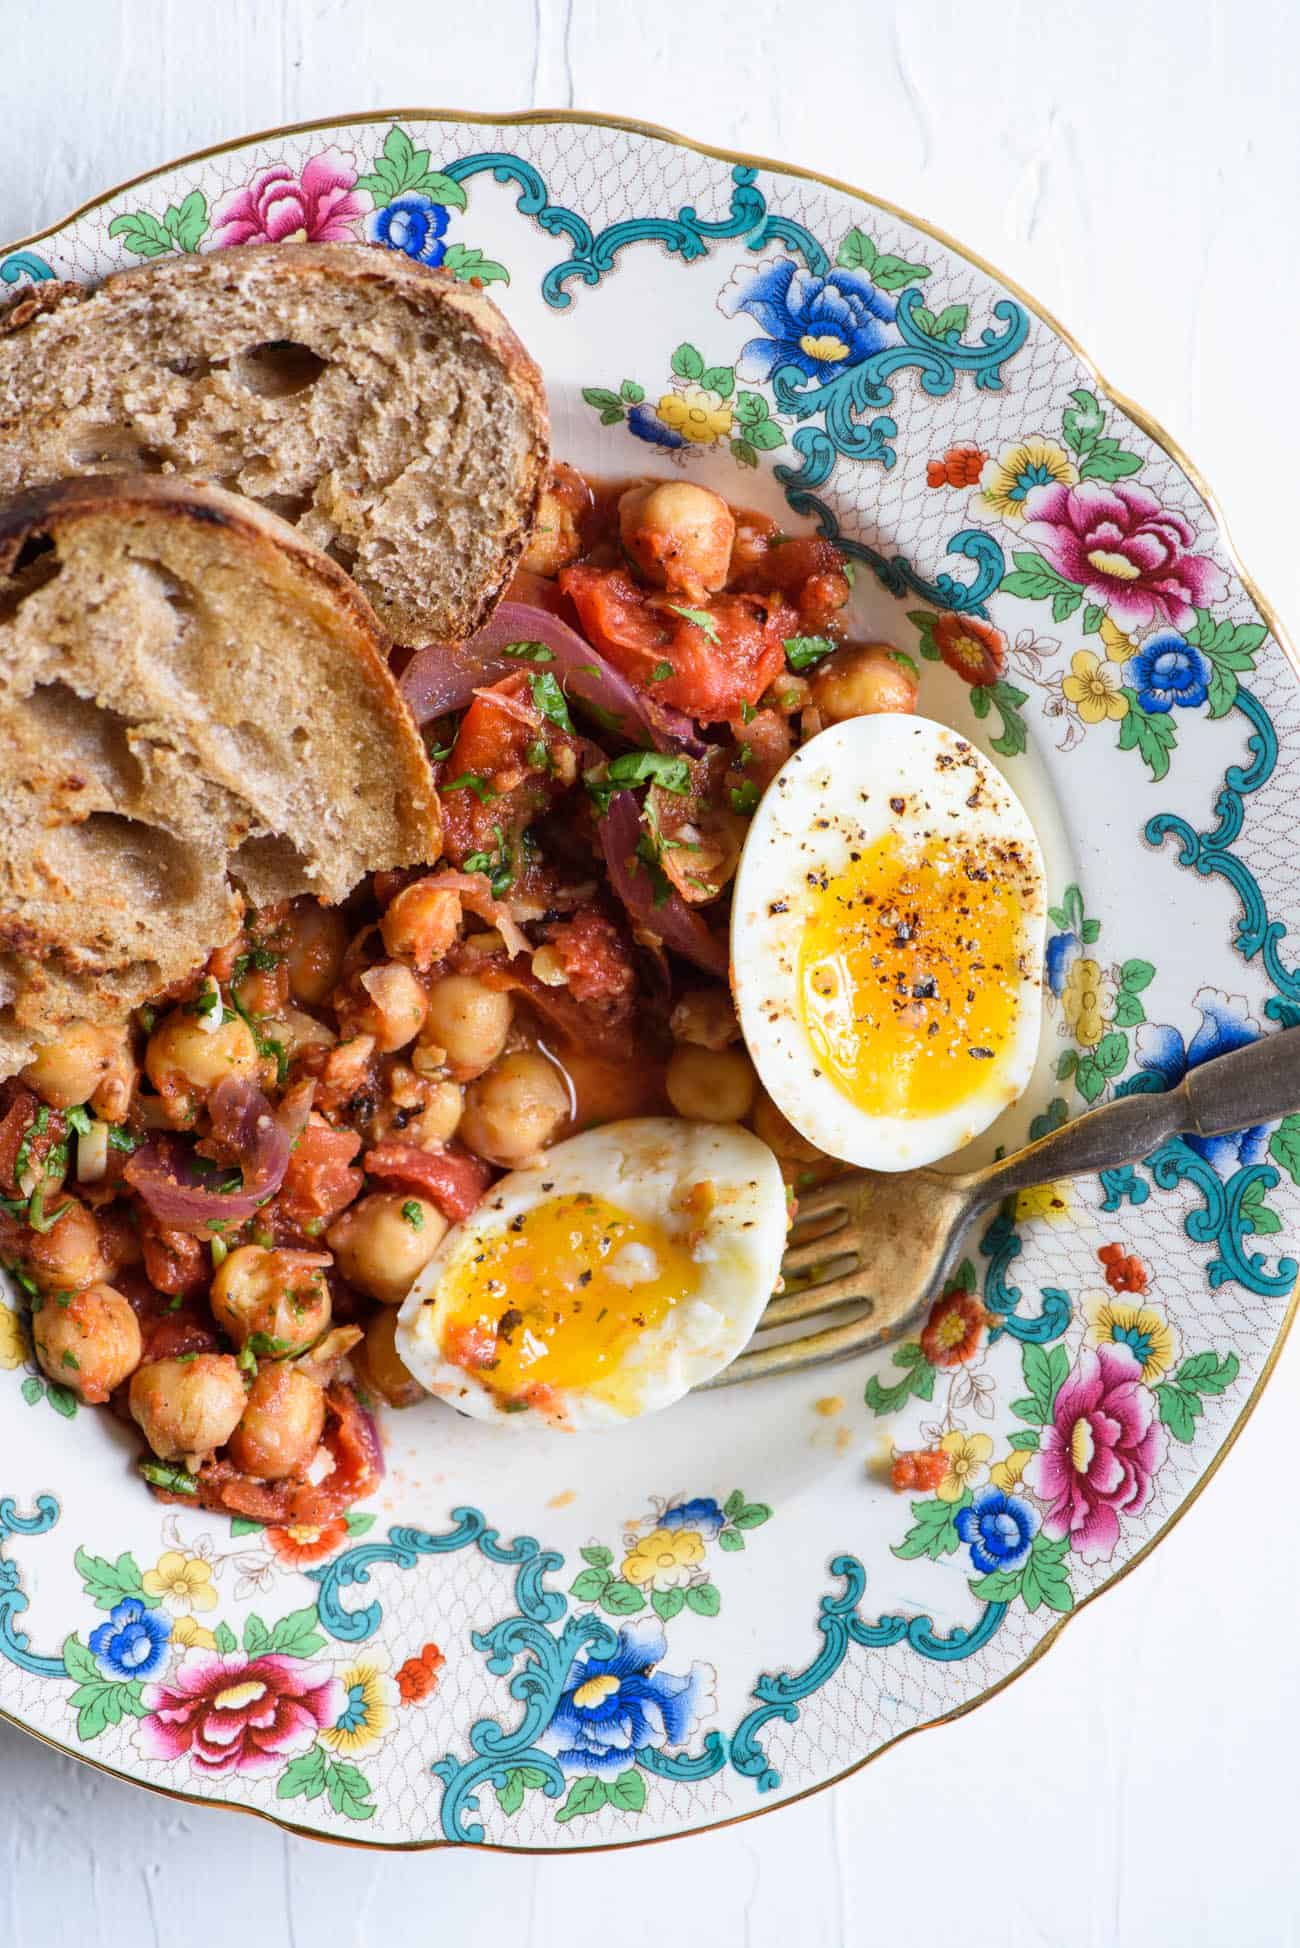 Curried chickpea breakfast hash on a colorful vintage plate with soft-boiled eggs and sourdough toast